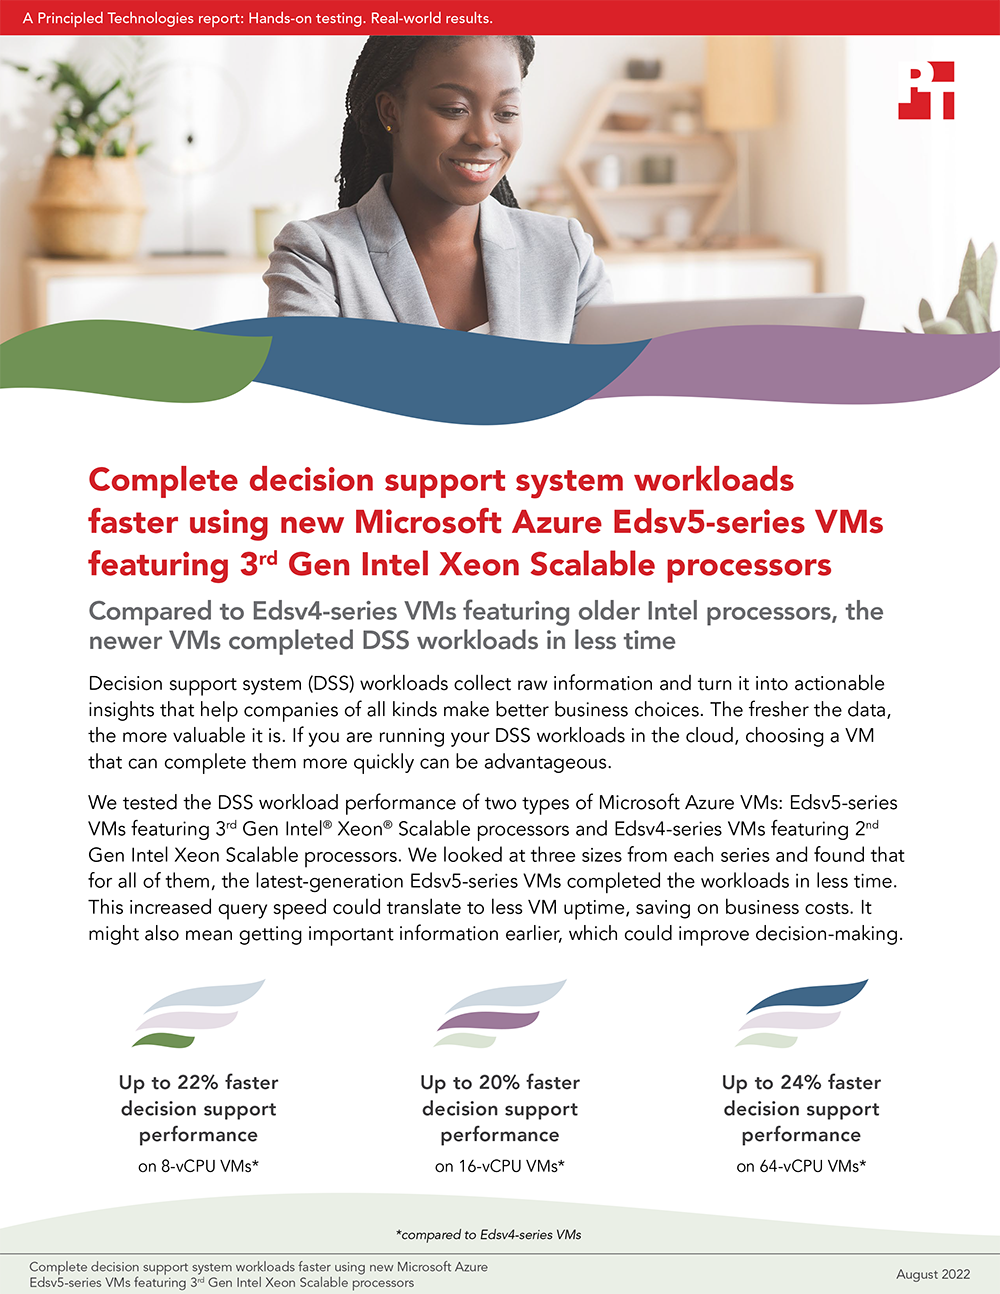 Complete decision support system workloads faster using new Microsoft Azure Edsv5-series VMs featuring 3rd Gen Intel Xeon Scalable processors